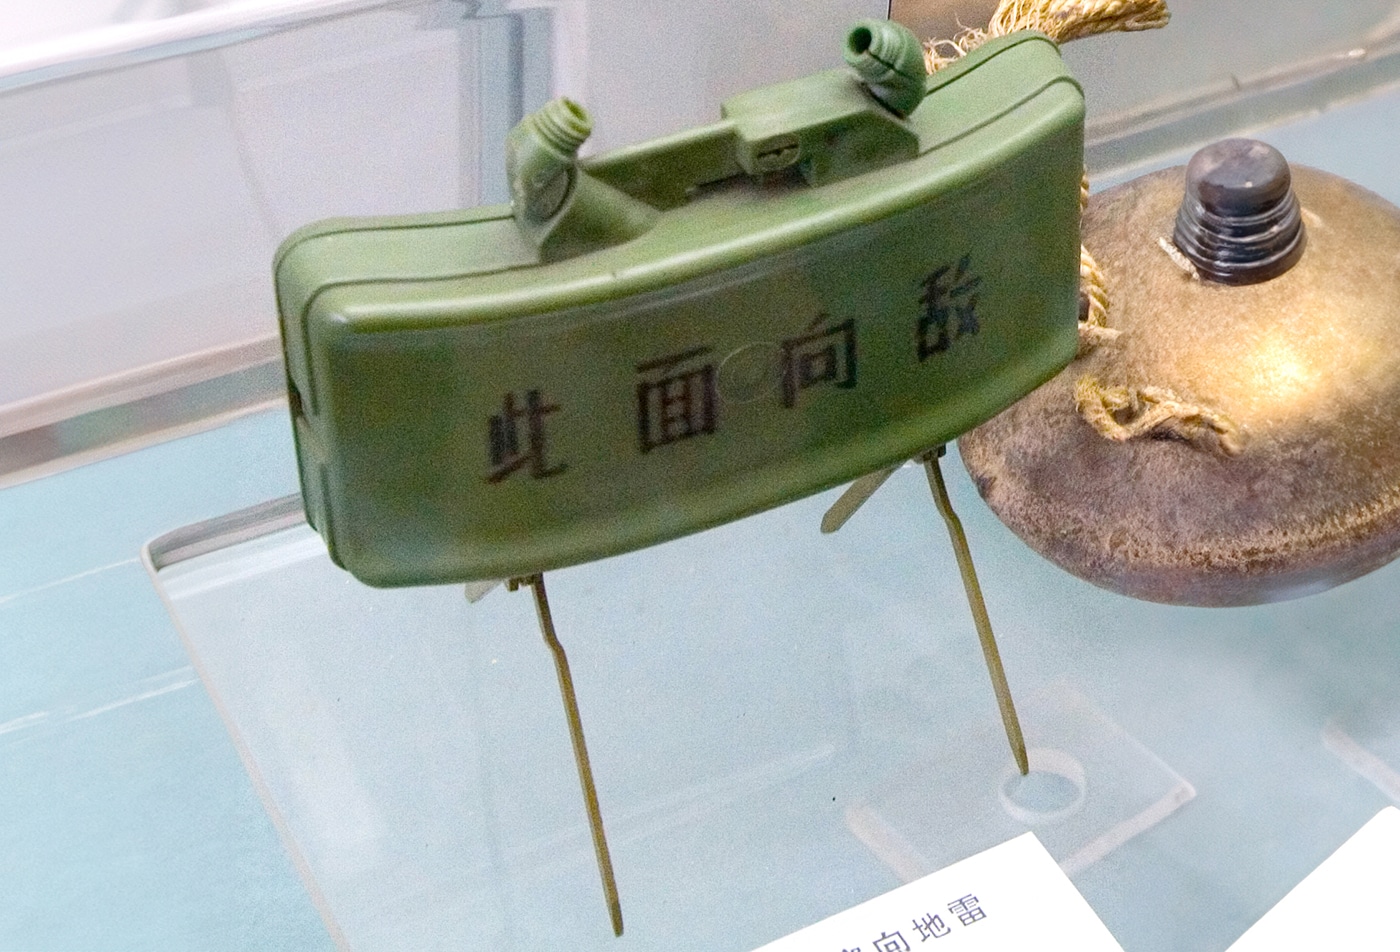 chinese type 66 anti-personnel mine